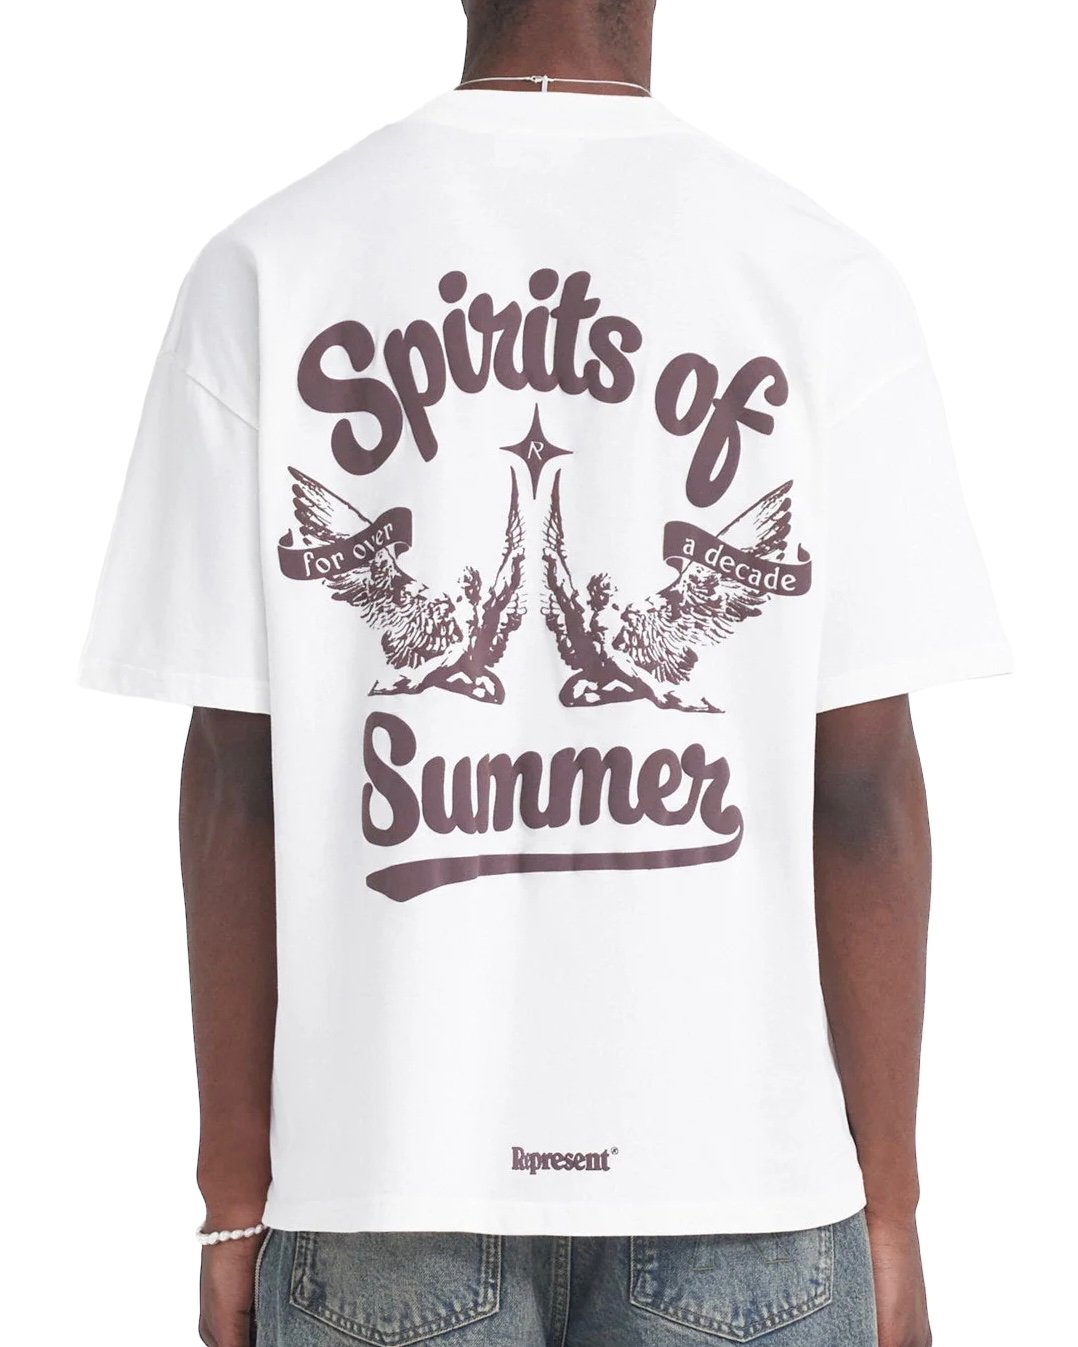 A person wearing a REPRESENT REPRESENT MLM410-72 SPIRITS OF SUMMER T-SHIRT WHI with the text "Spirits of Summer" in large font and "for over a decade" in smaller font, along with two illustrated birds. The REPRESENT MLM410-72 SPIRITS OF SUMMER T-SHIRT WHI has an oversized fit. Front of the shirt is not visible.